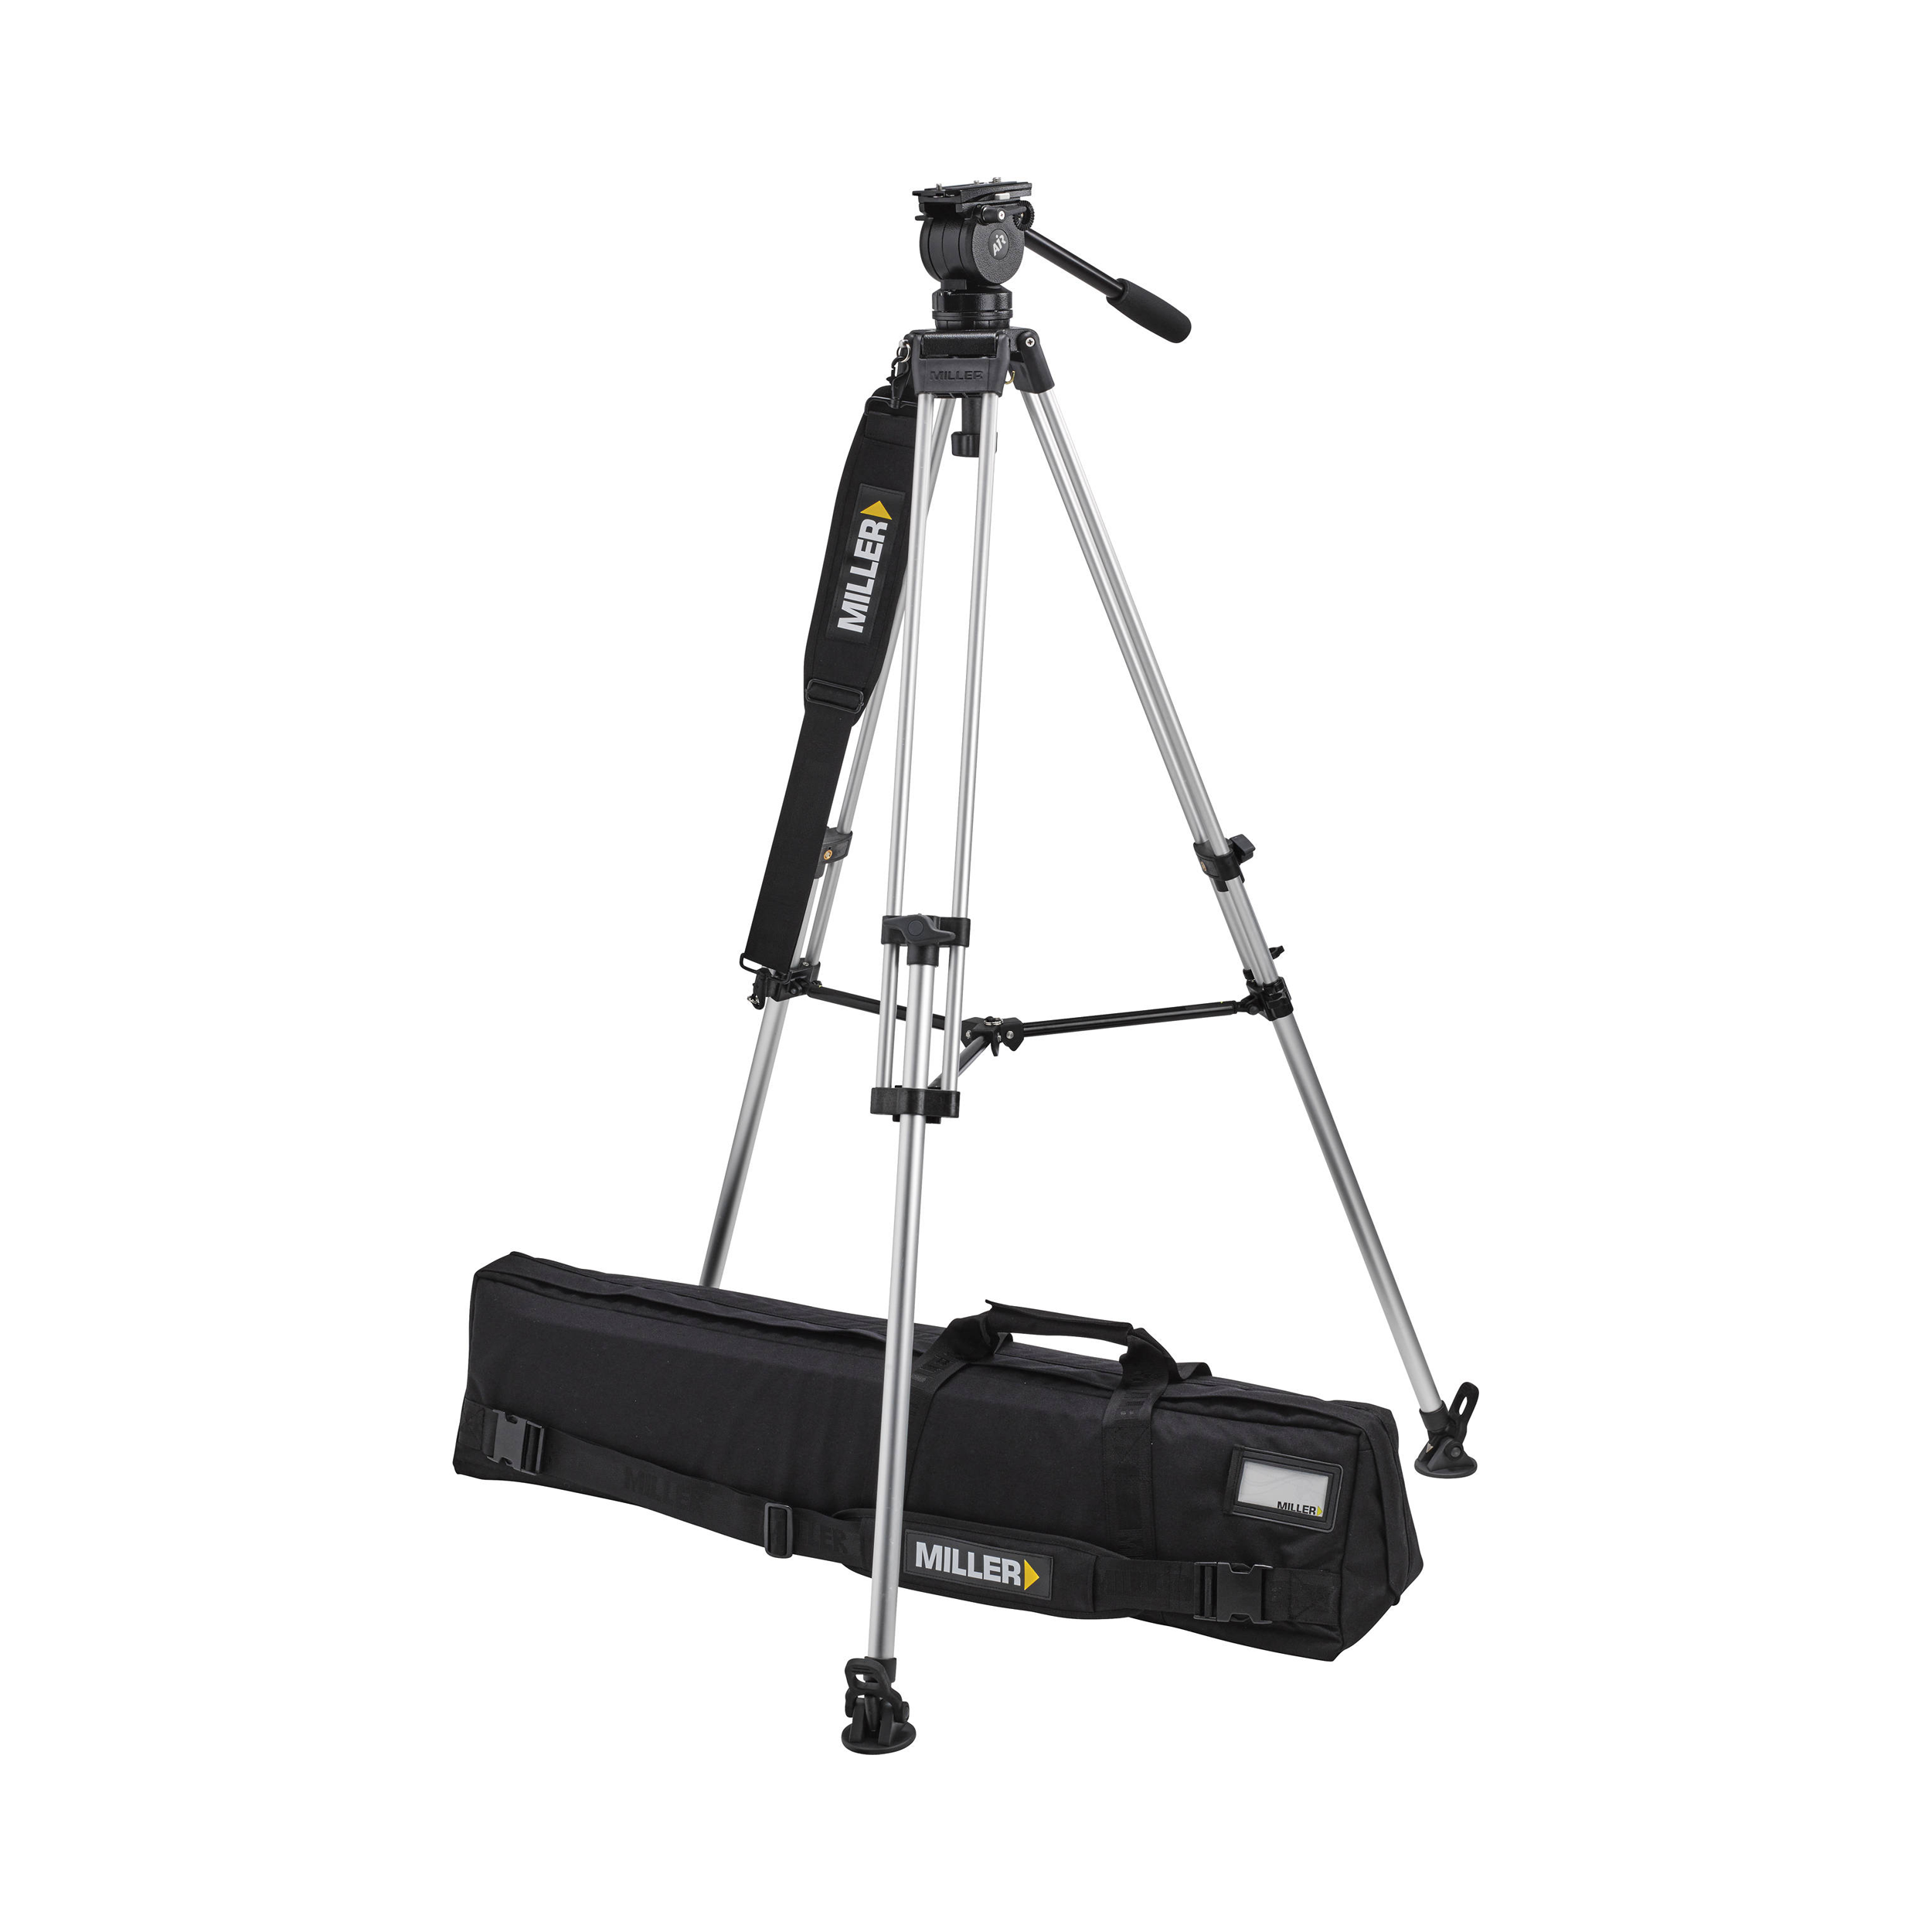 MILLER AIR (1042) Toggle LW Tripod (440) AG Spreader (835) Pan Handle (682) Feet (550) Soft case (3512) Camera Plate (1204)